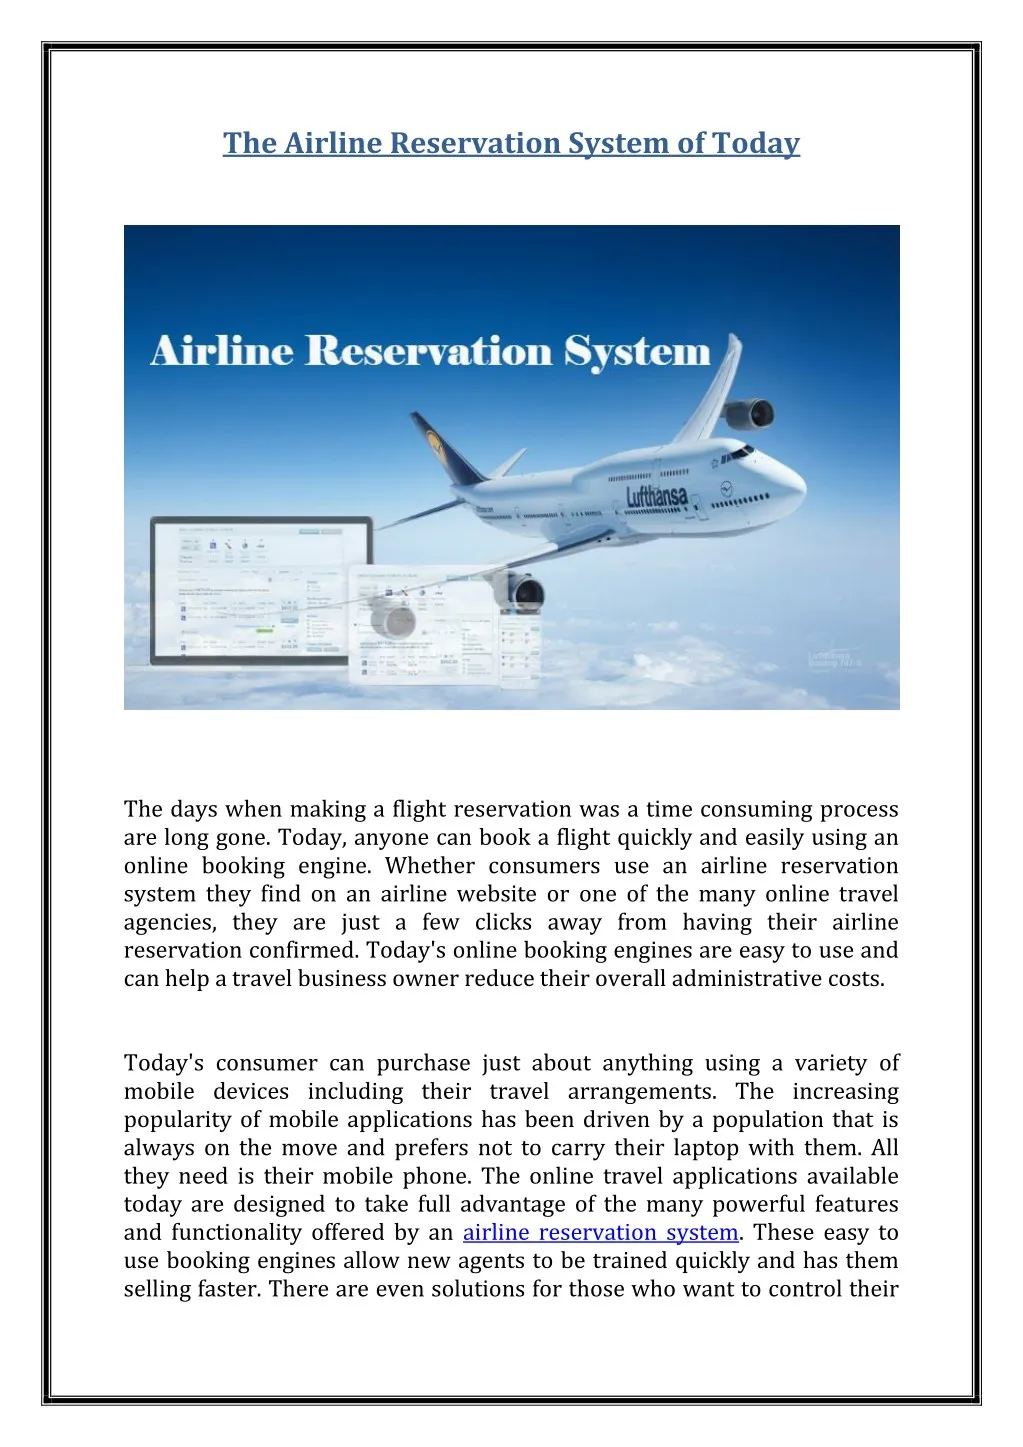 the airline reservation system of today